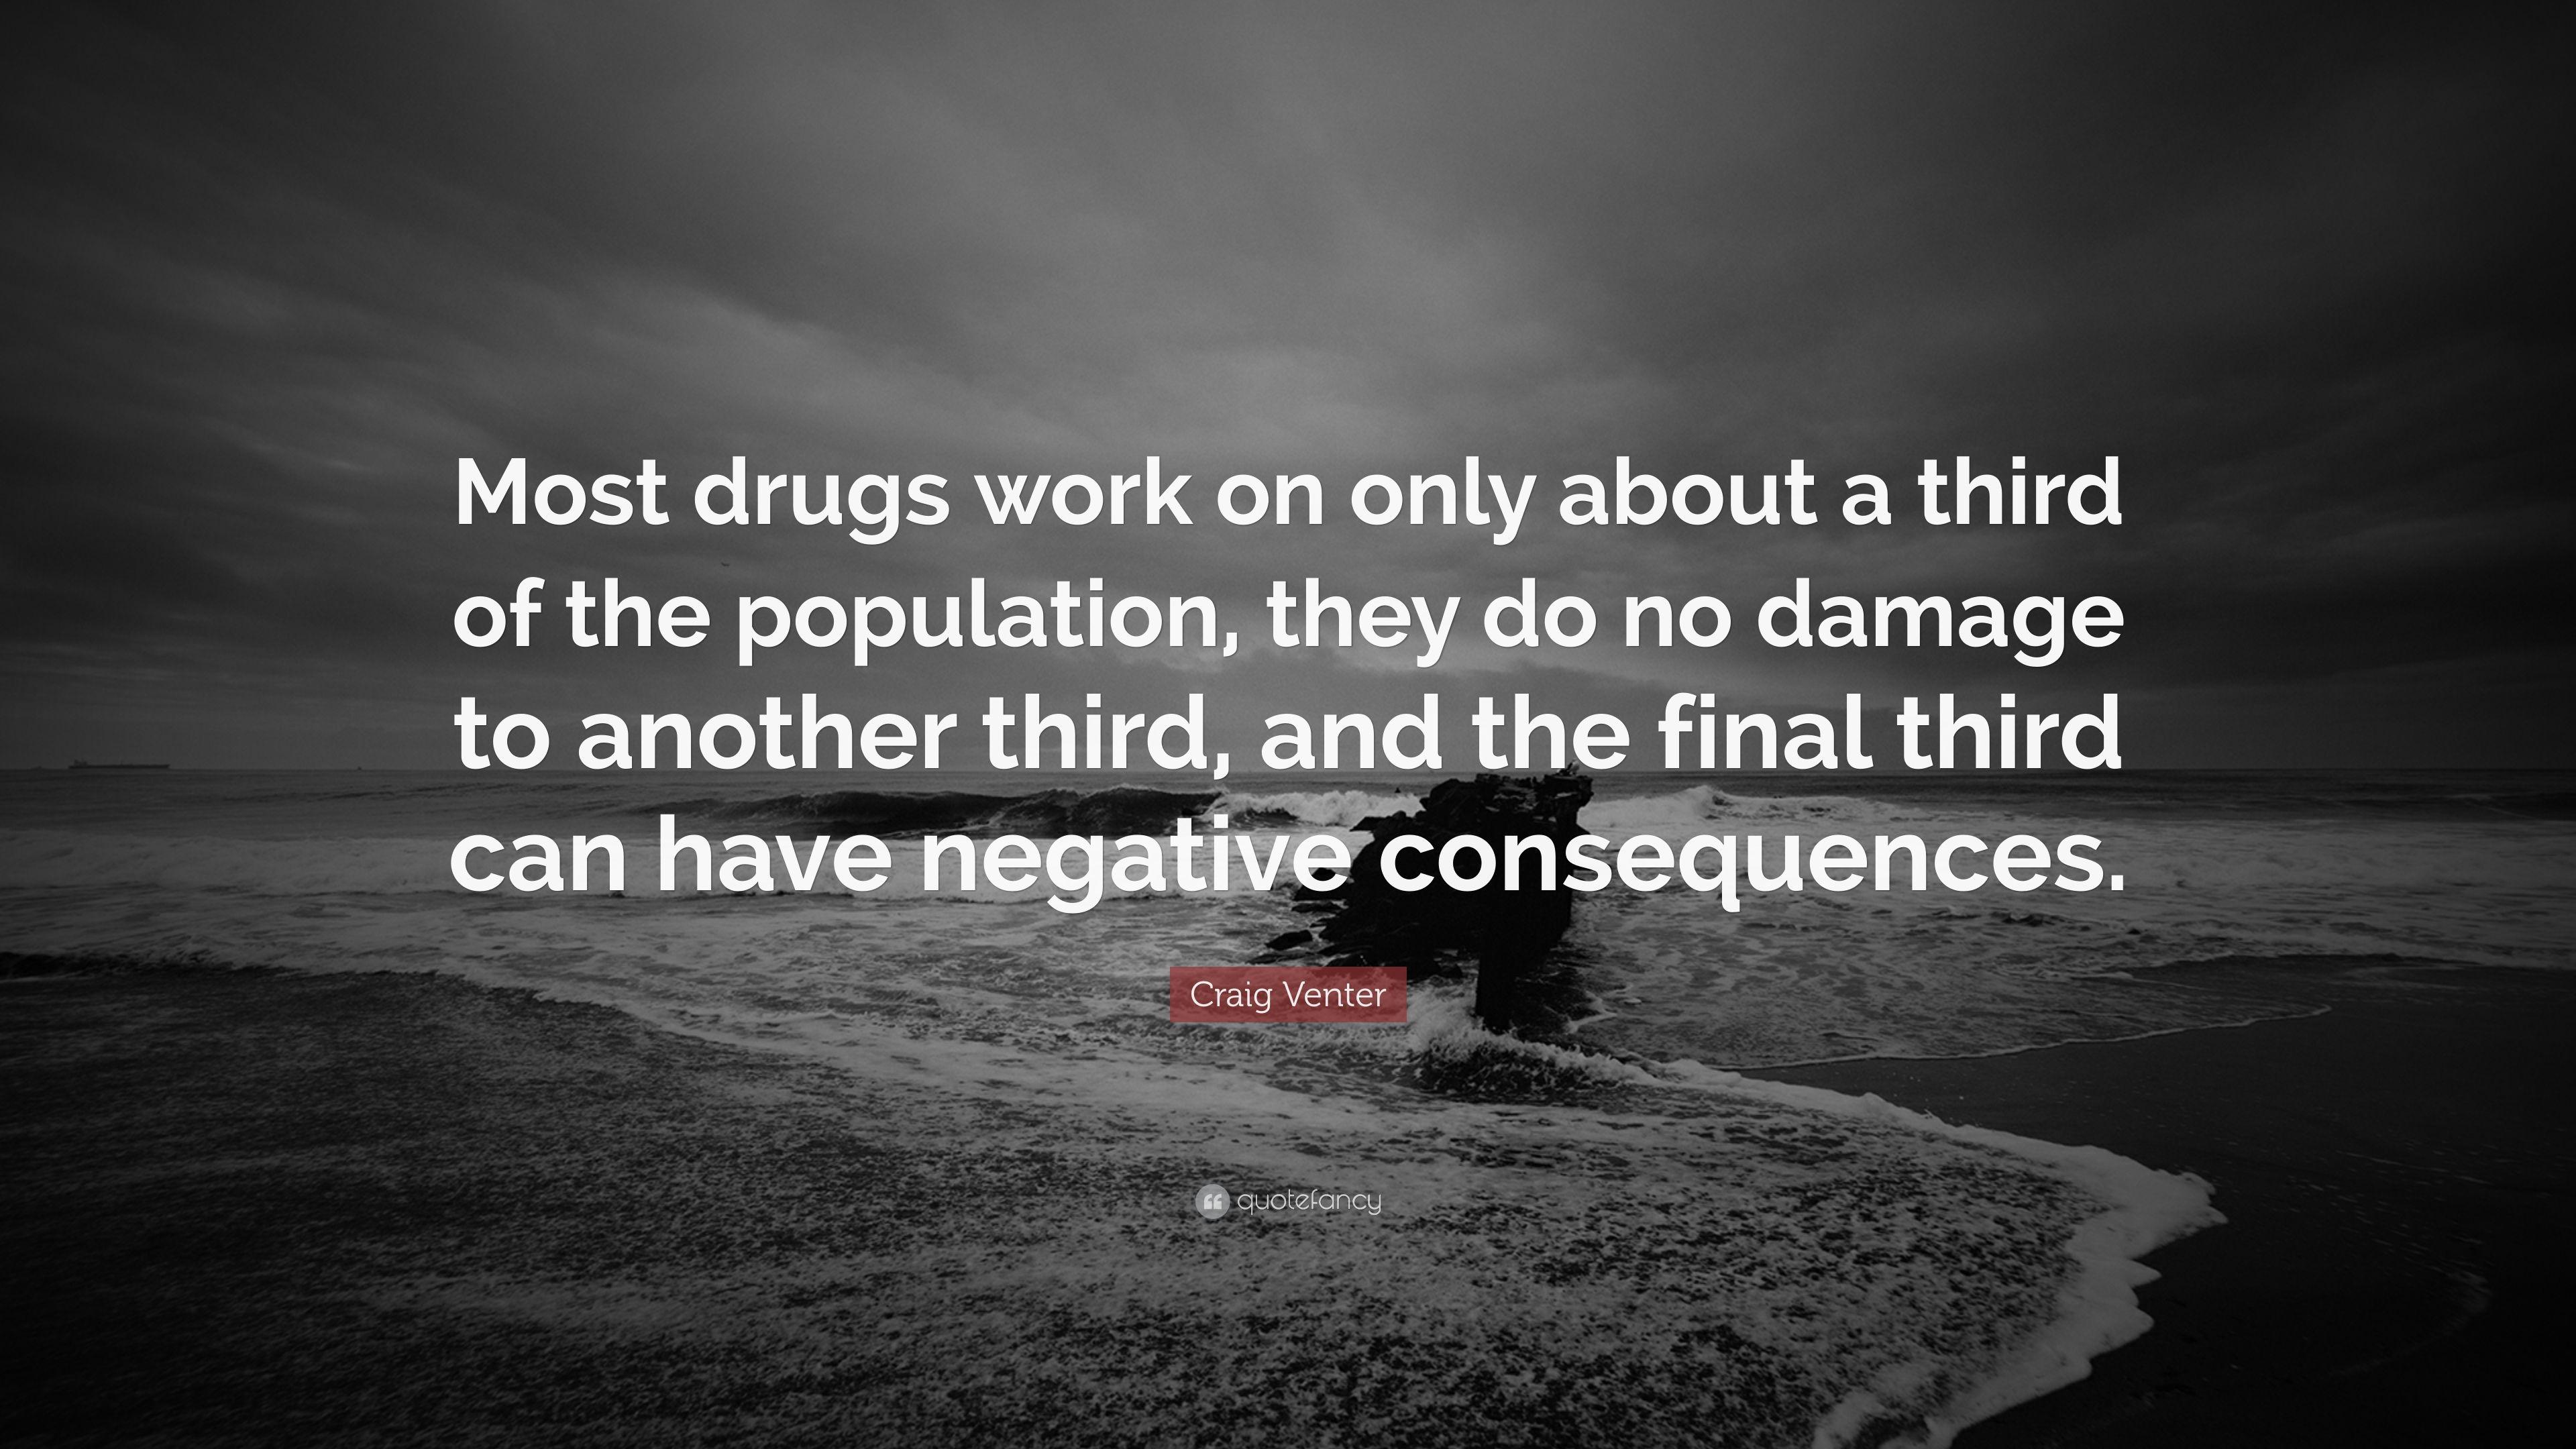 Craig Venter Quote: “Most drugs work on only about a third